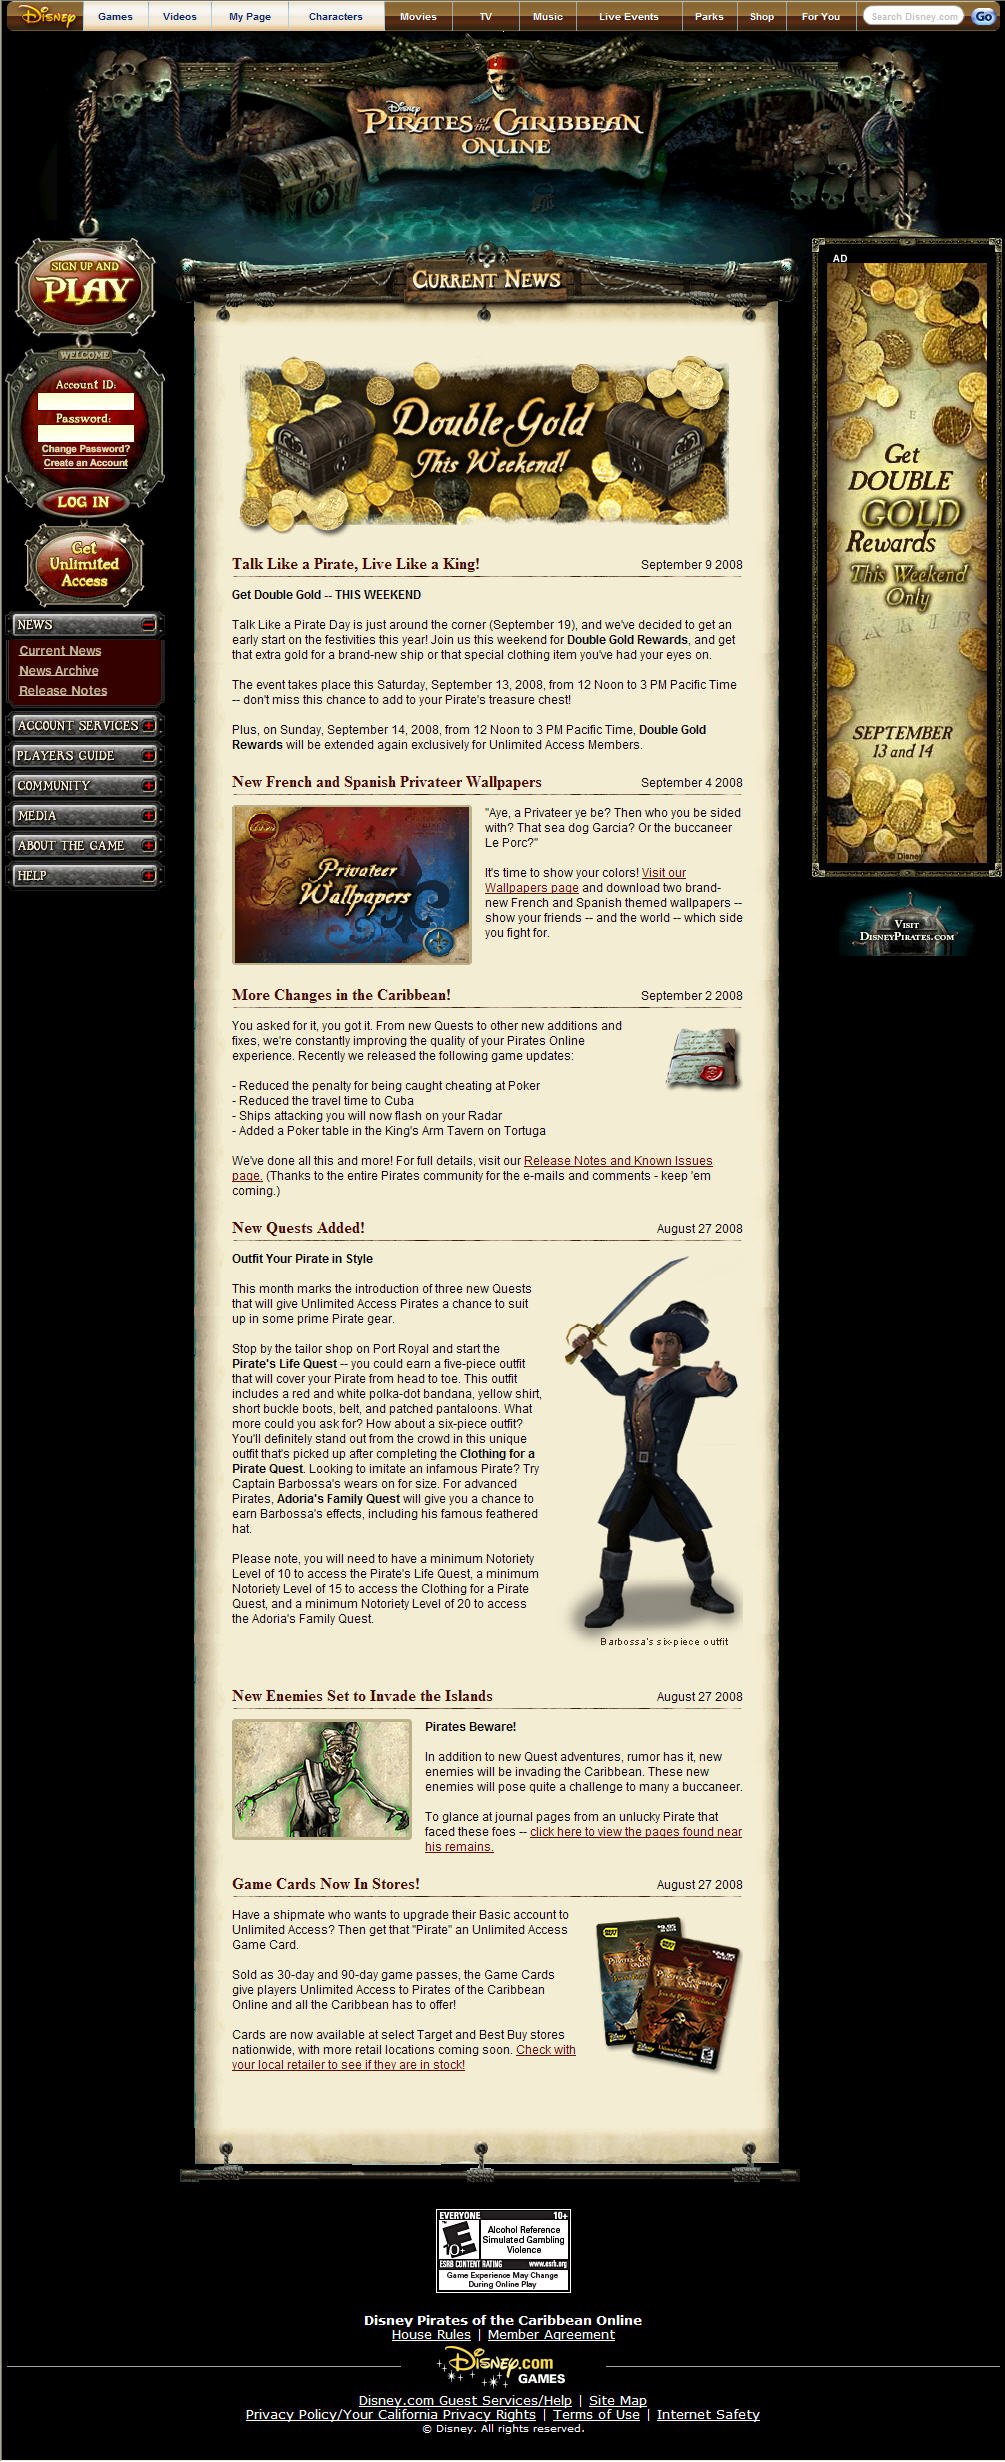 Pirates of the Caribbean Online image